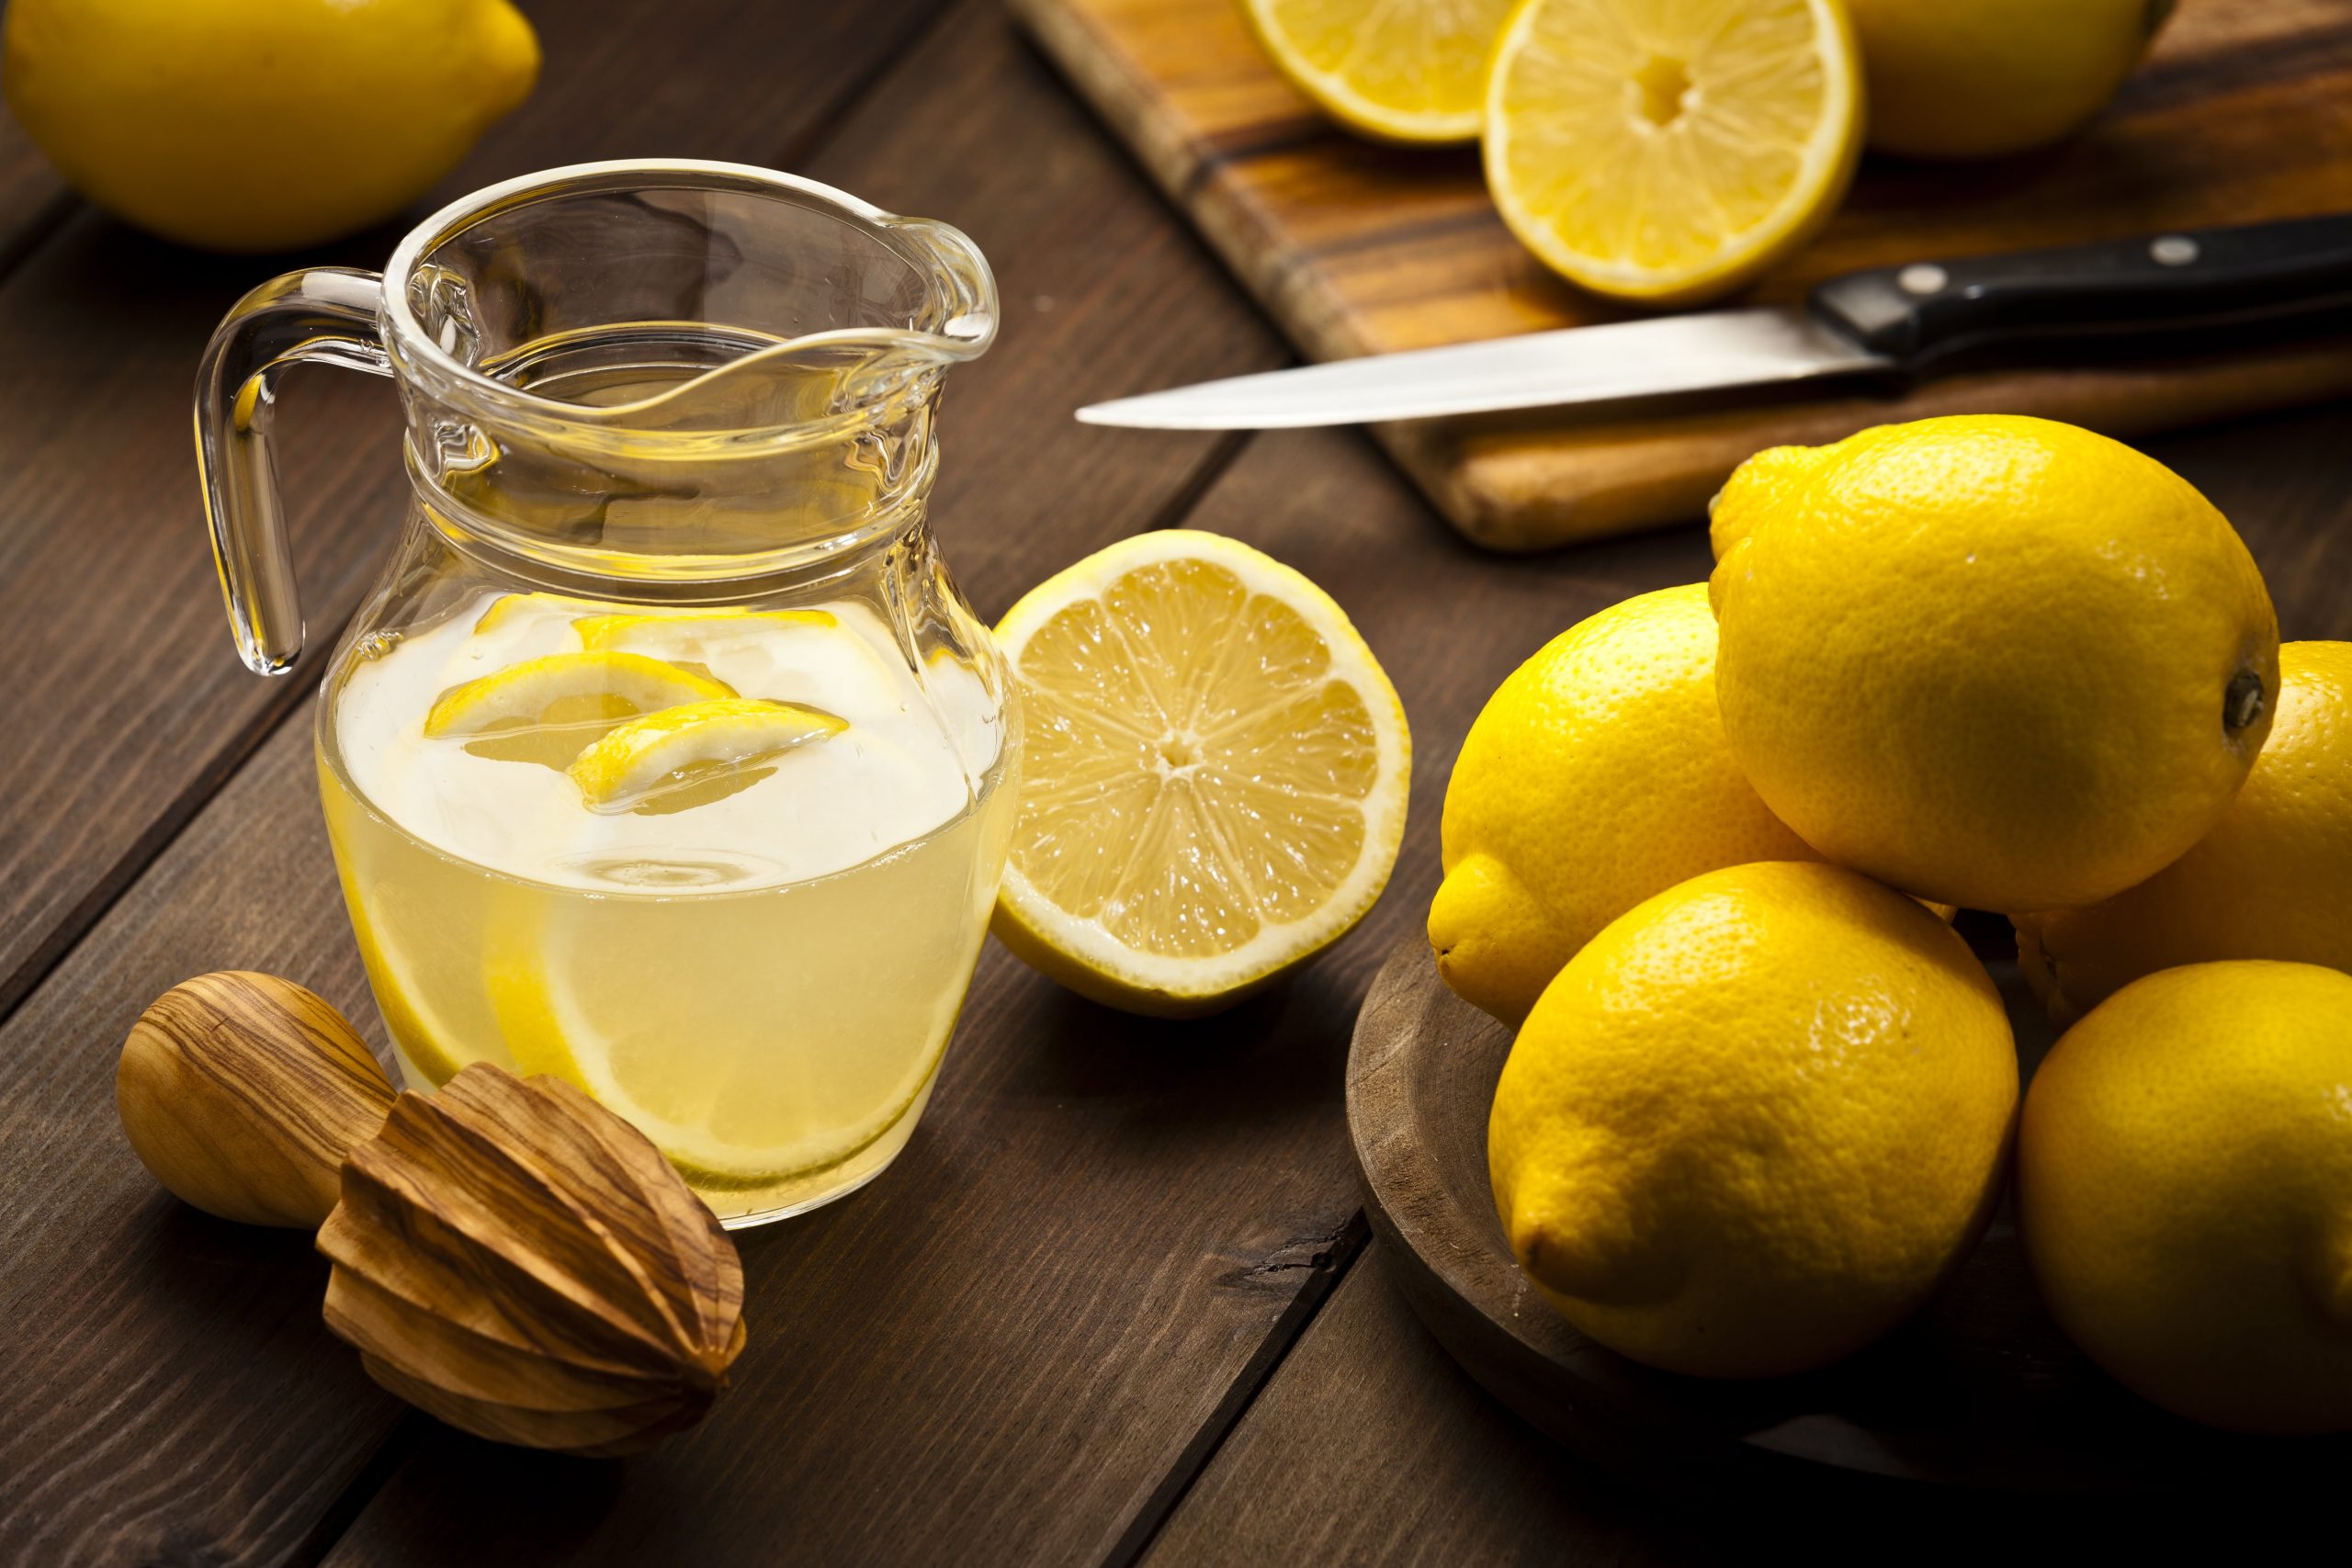 What health benefits do lemons have?